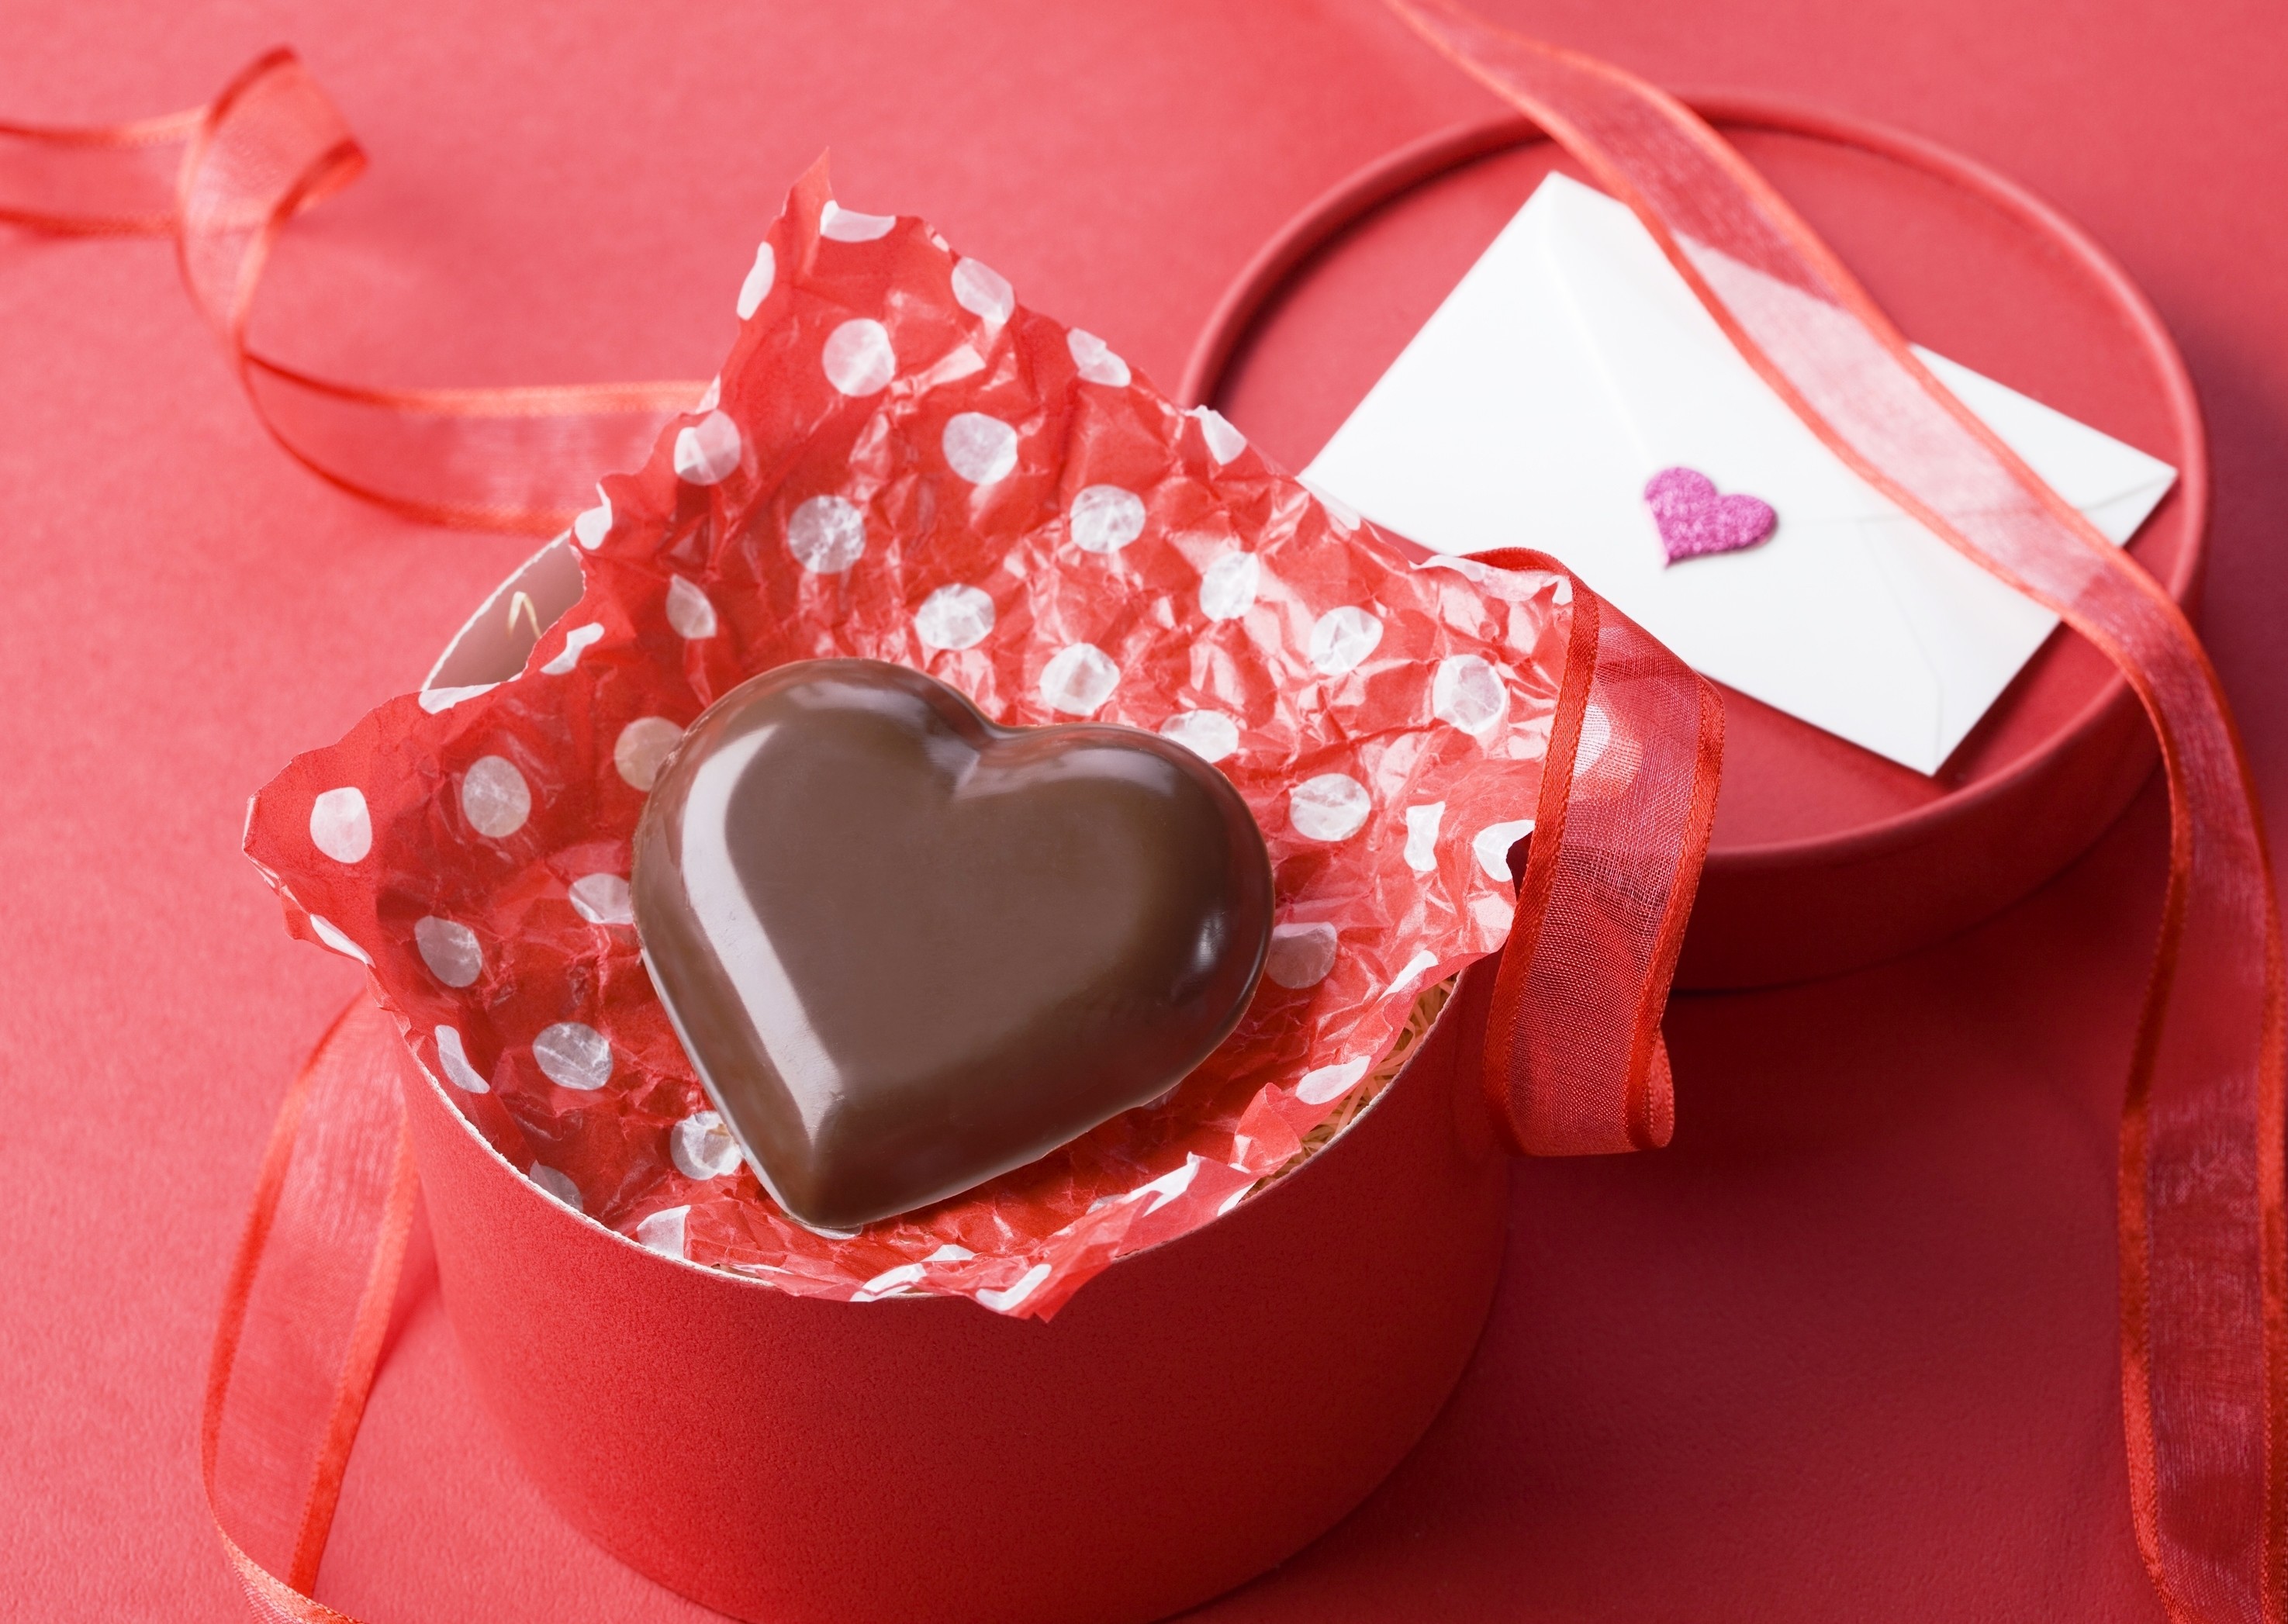 2950x2094 Wallpaper Heart, Chocolate, Box, Red, Gift, Ribbon, Letter